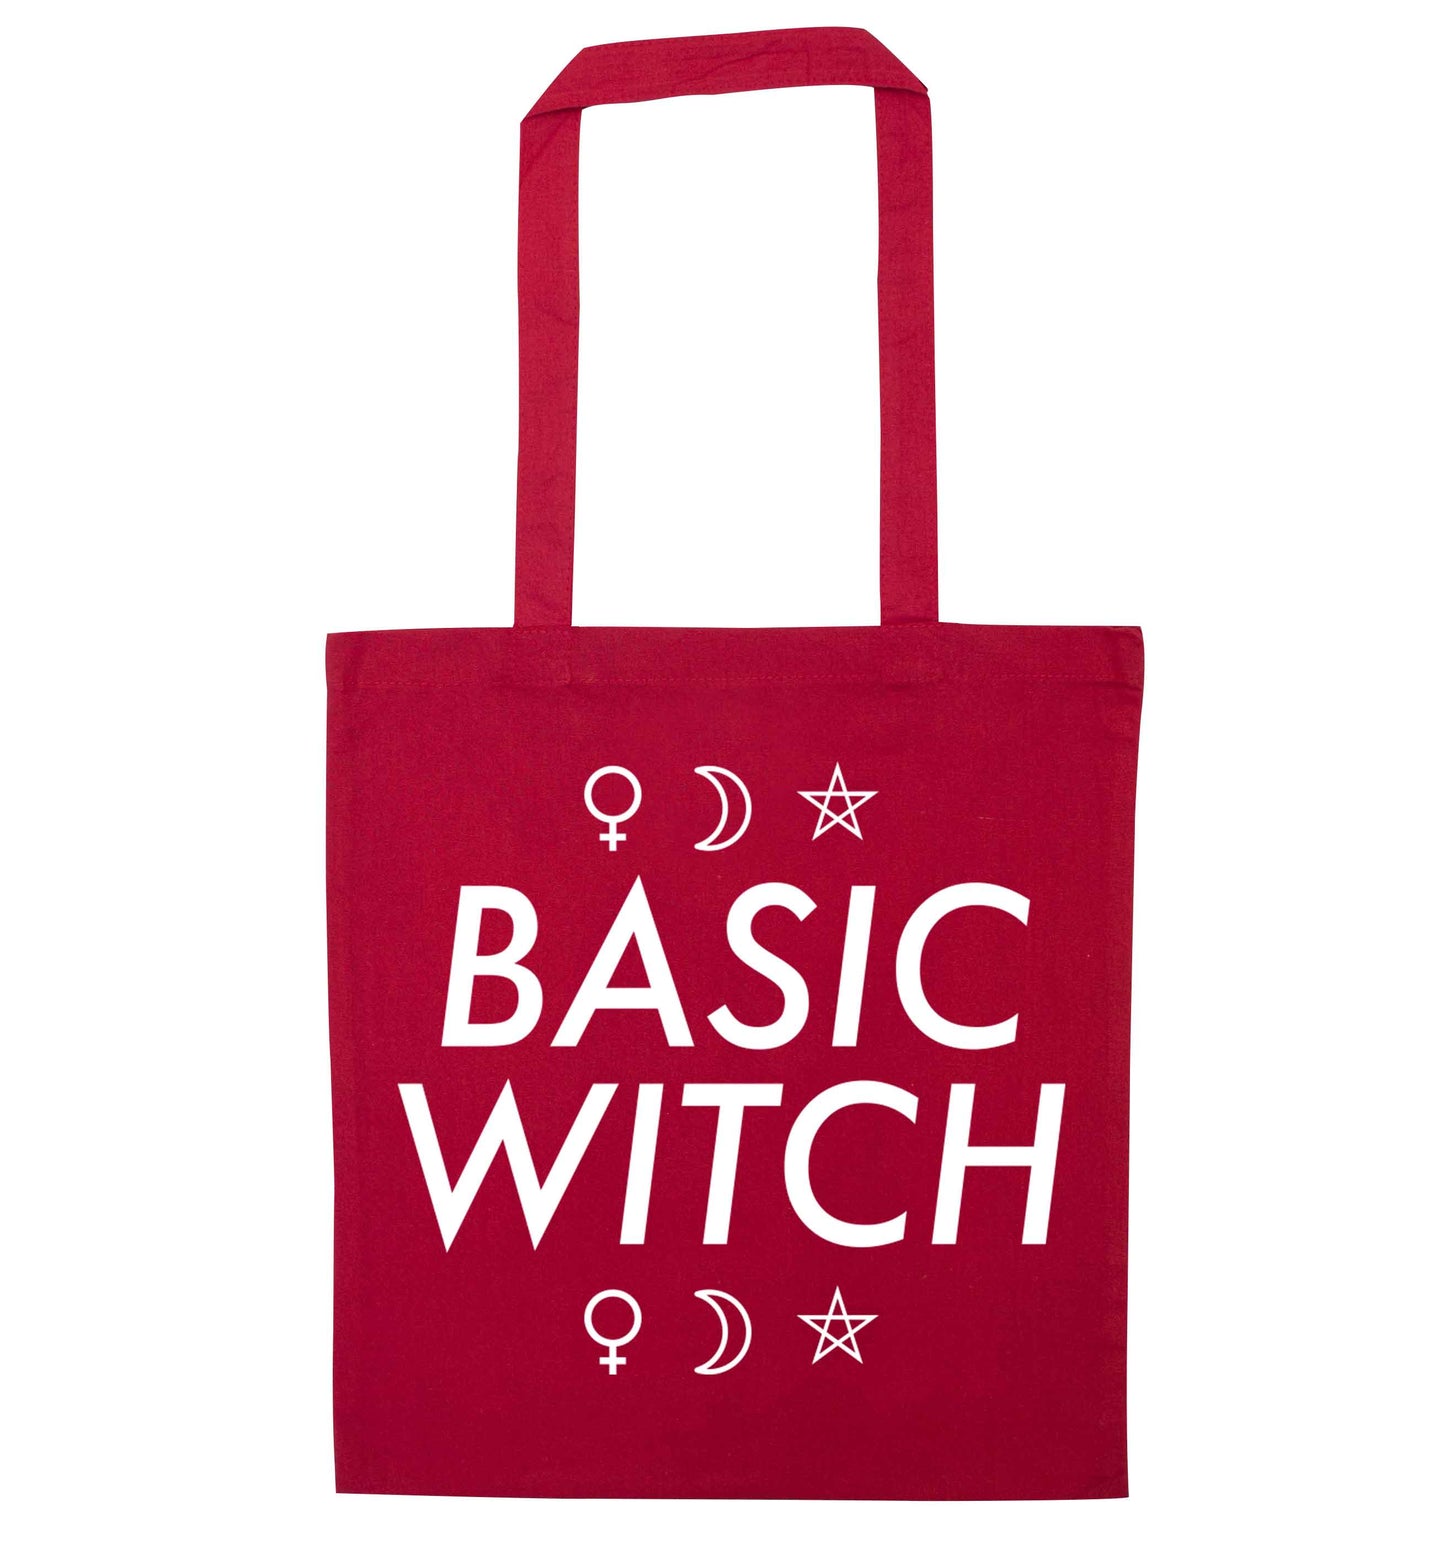 Basic witch 1 red tote bag